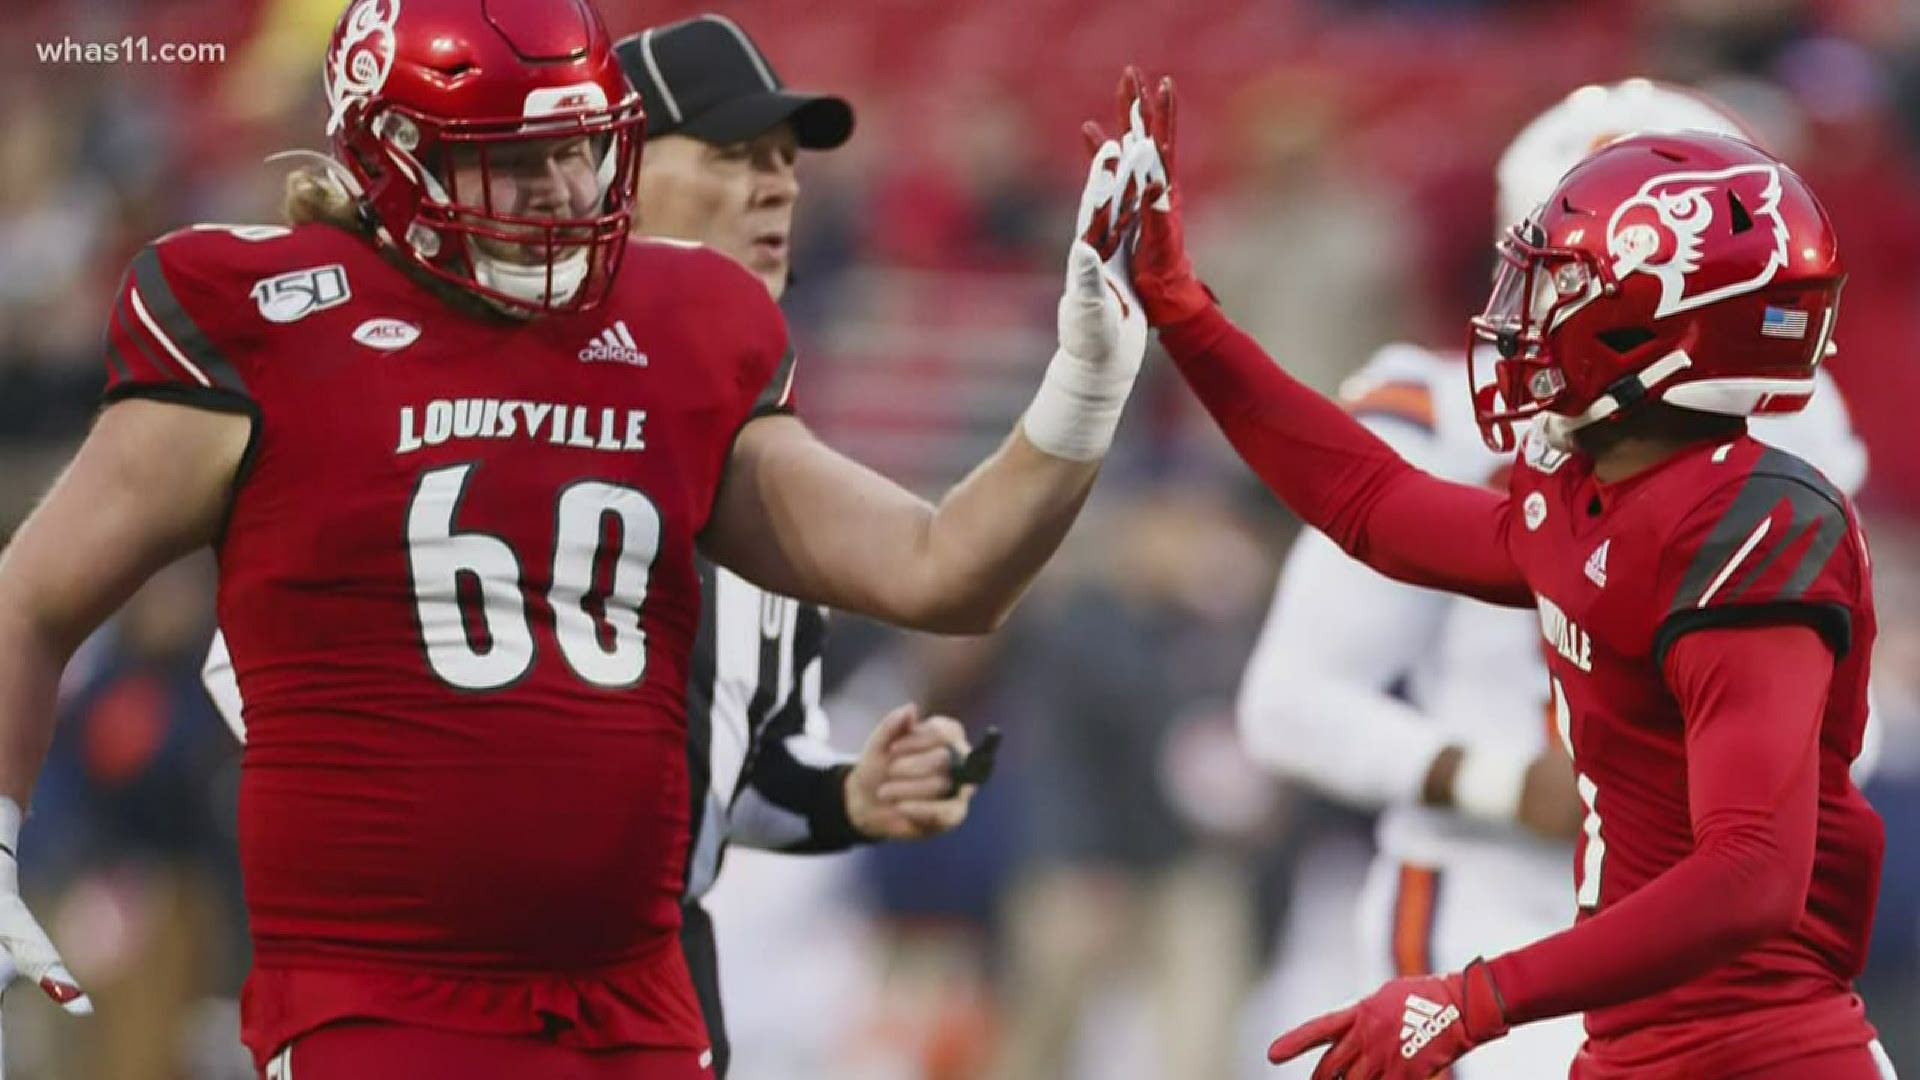 The St. Xavier graduate worked his way from walk-on to starting right tackle for the Cardinals.